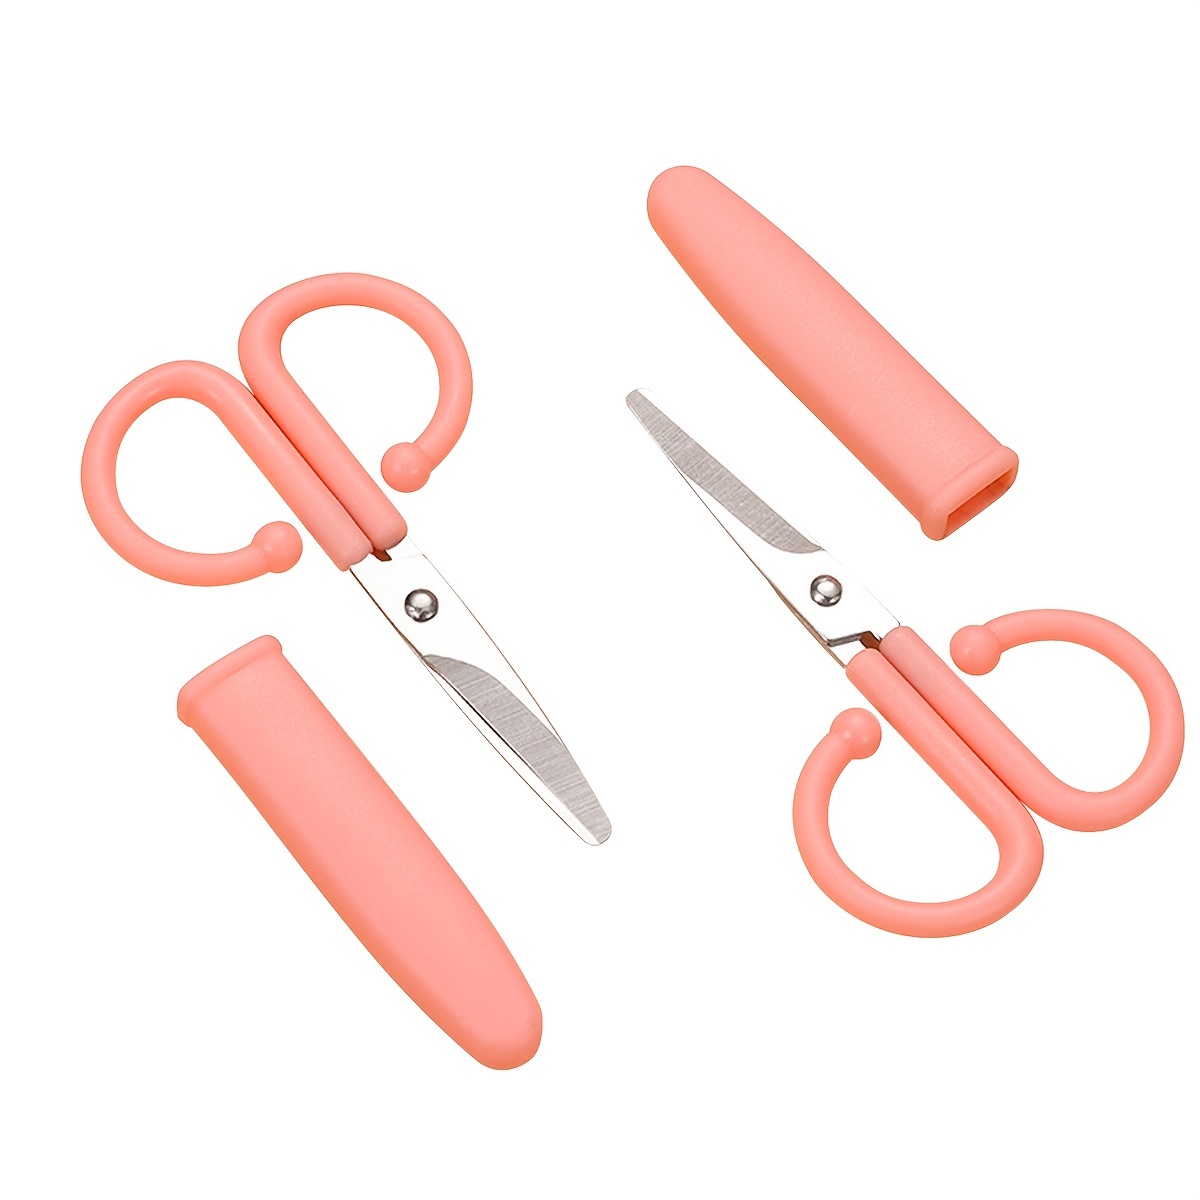 2pcs Cute Small Safety Art Scissors With Protective Cover Safety Scissors  Decoupage Scissors Detail Scissors For Craft DIY School Office 9.5cm/3.7inch